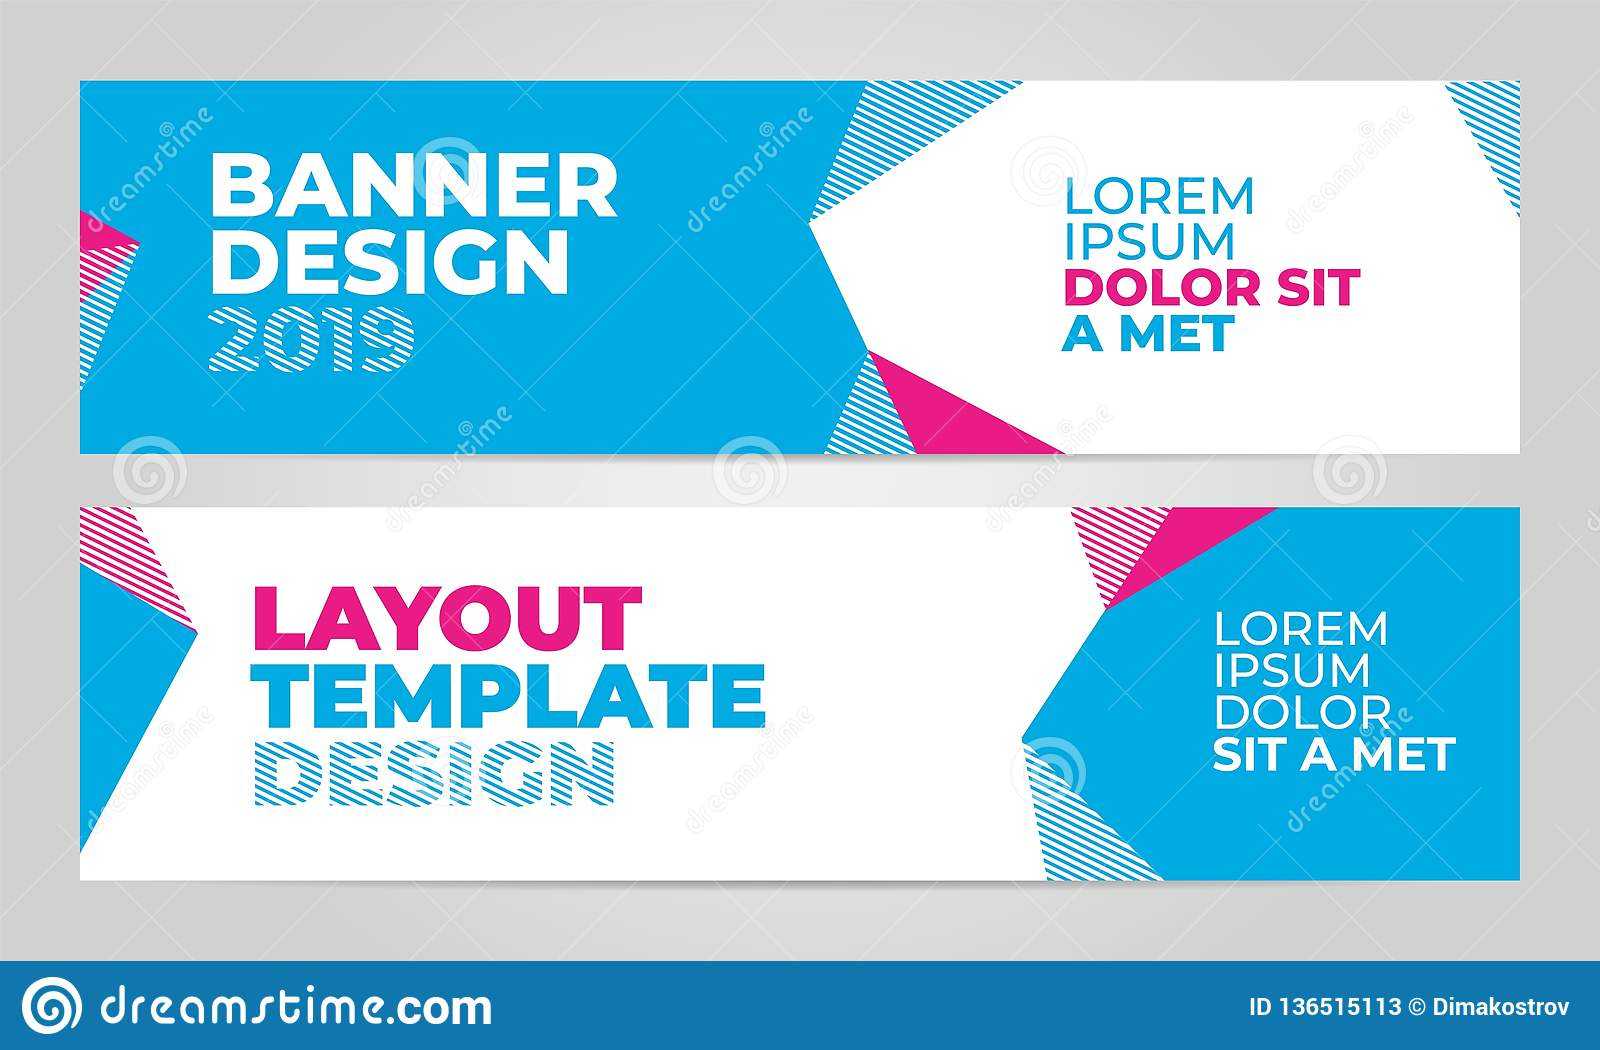 Layout Banner Template Design For Winter Sport Event 2019 Intended For Event Banner Template